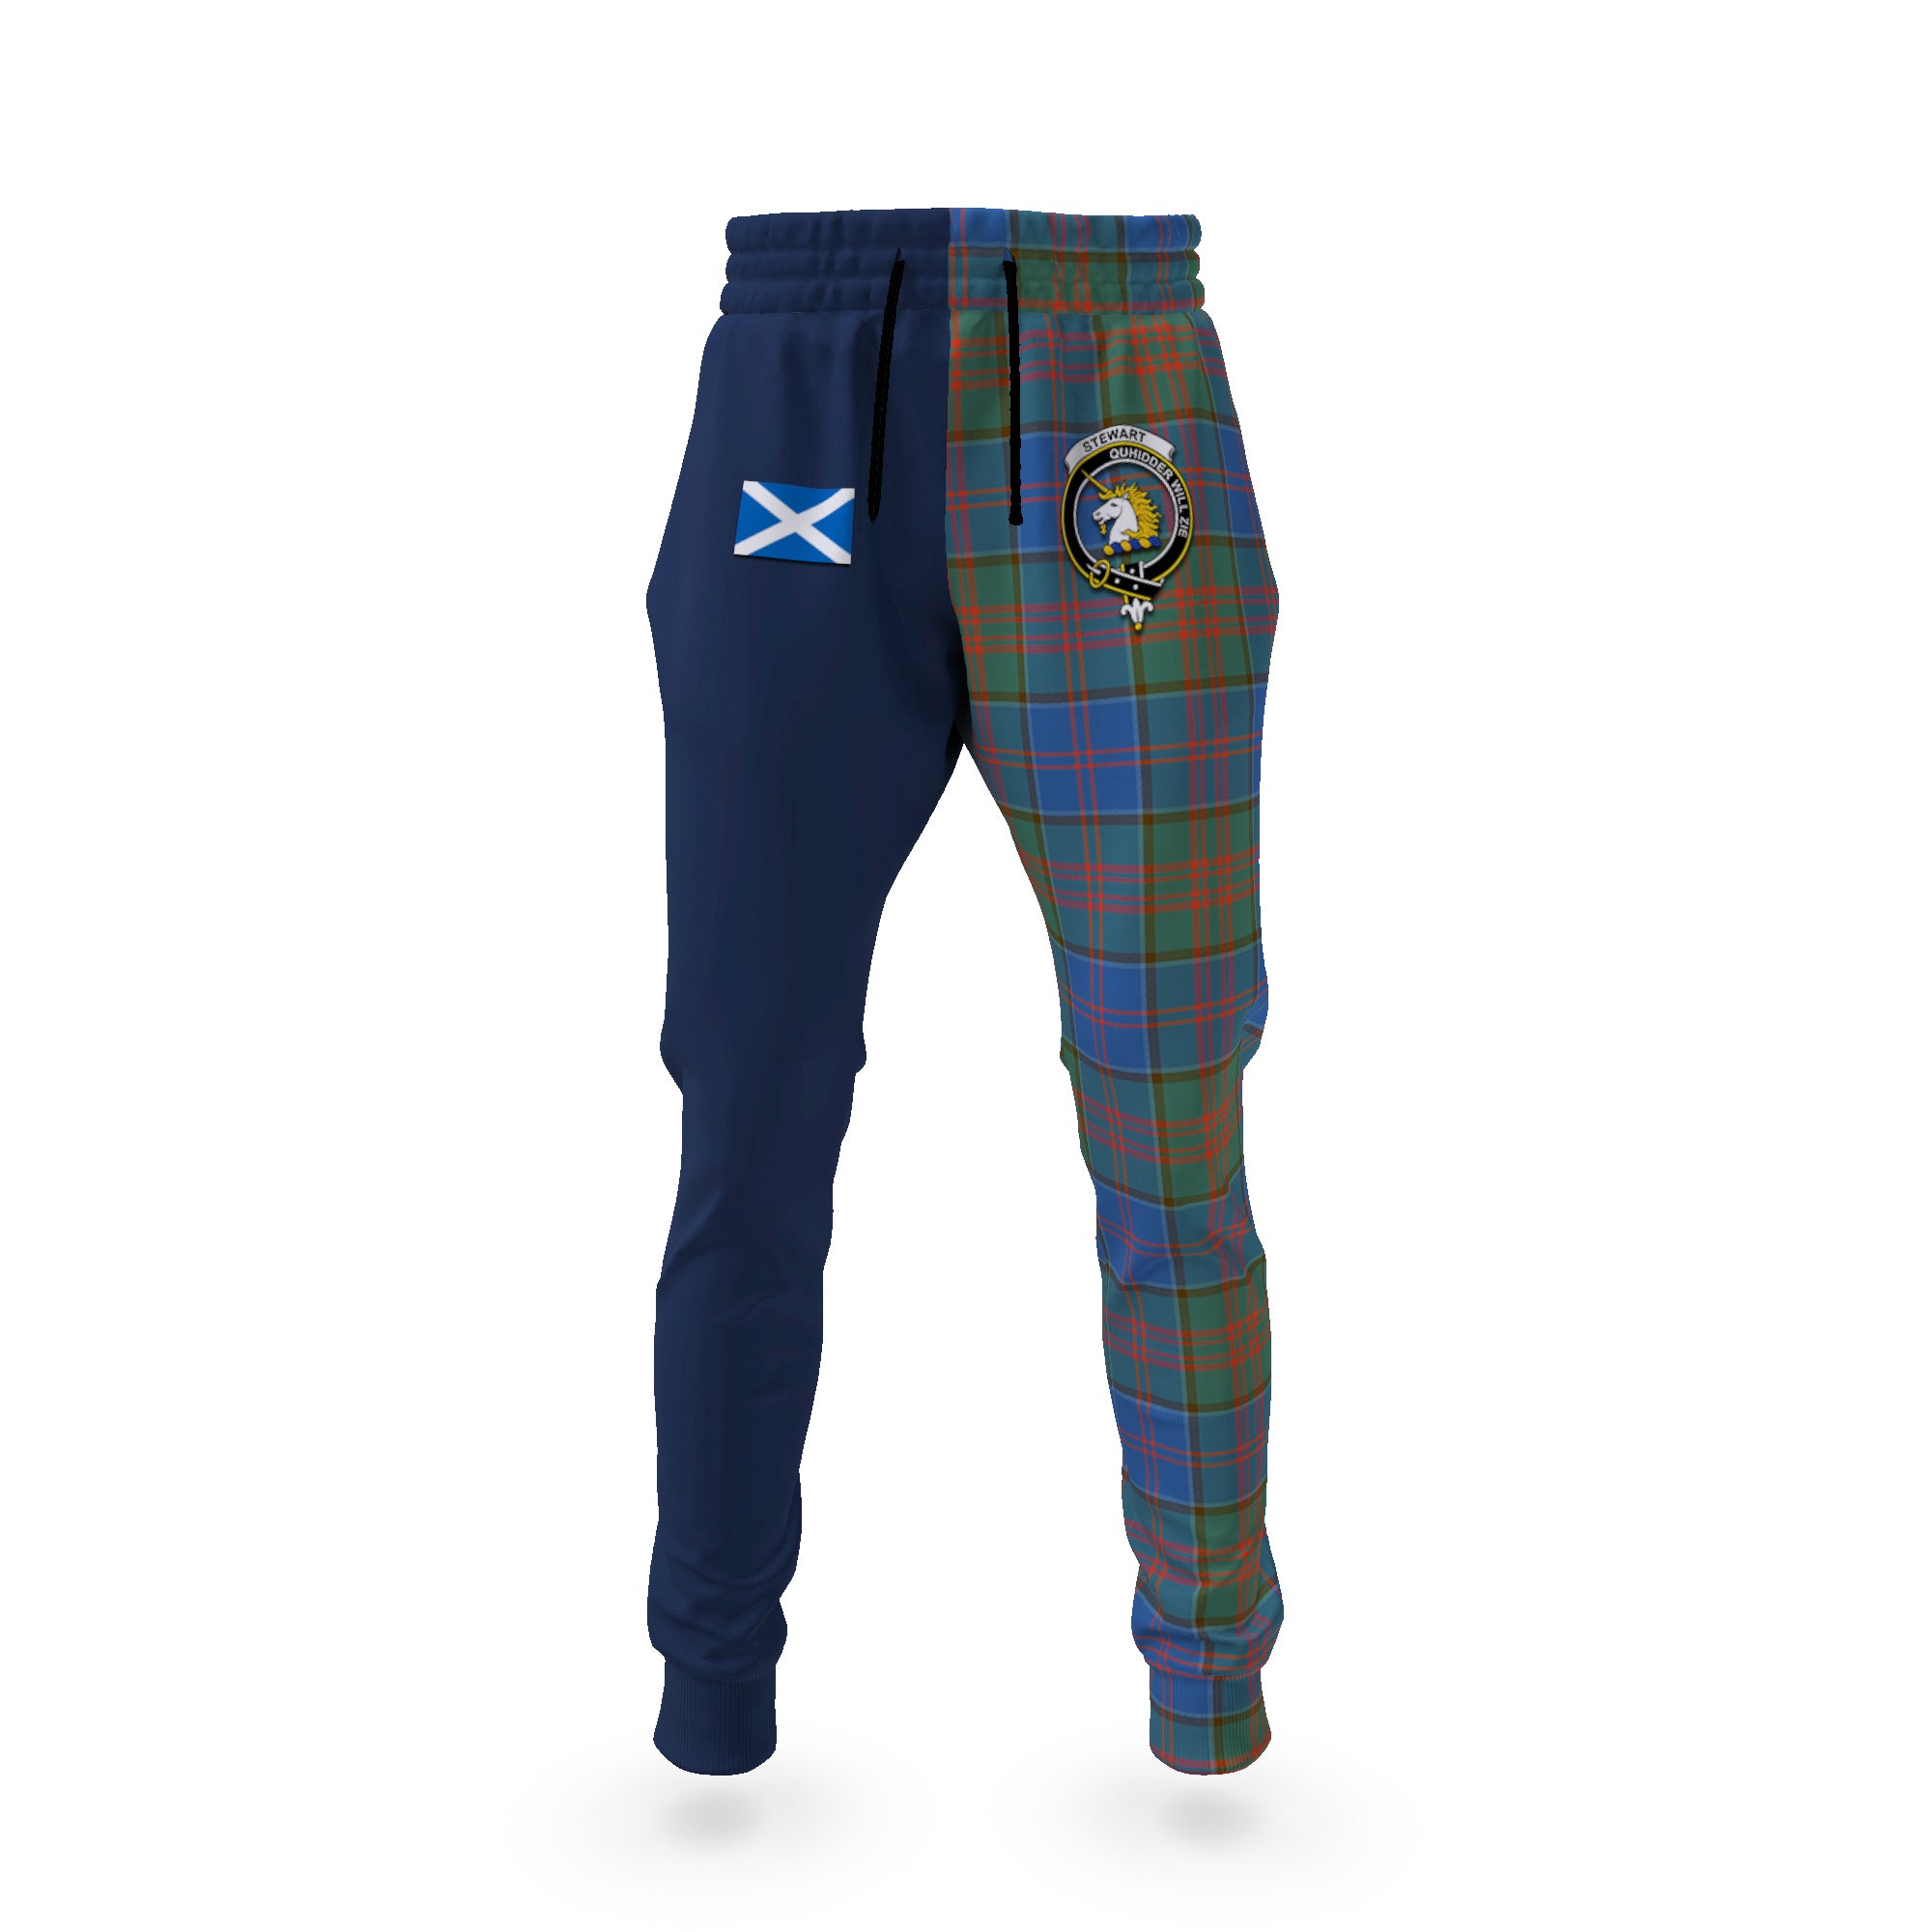 stewart-of-appin-hunting-ancient-tartan-plaid-joggers-family-crest-tartan-joggers-with-scottish-flag-half-style